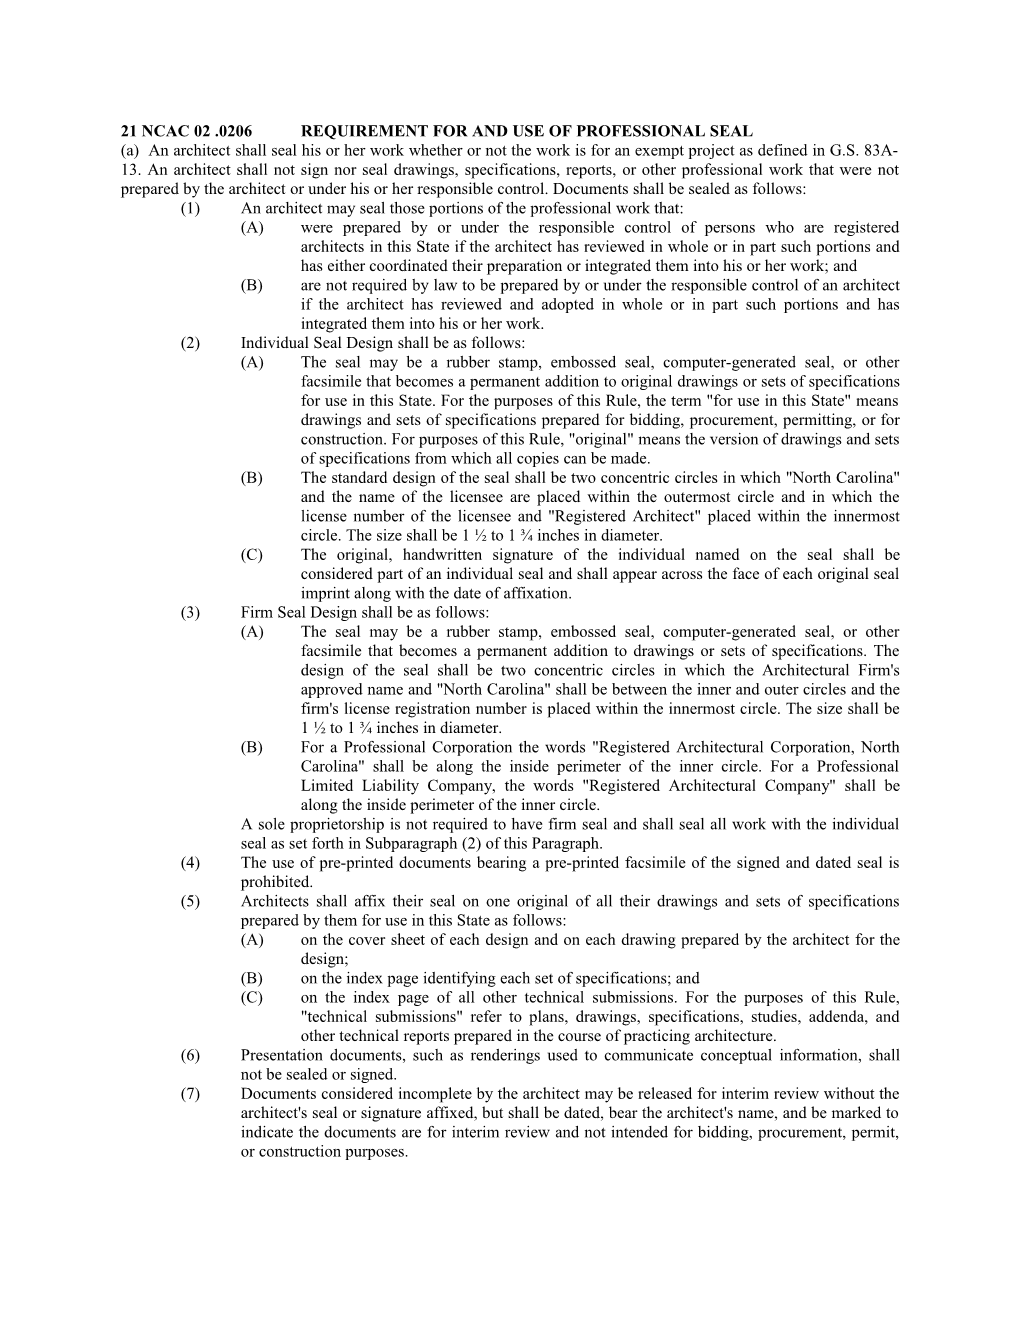 21 Ncac 02 .0206Requirement for and Use of Professional Seal